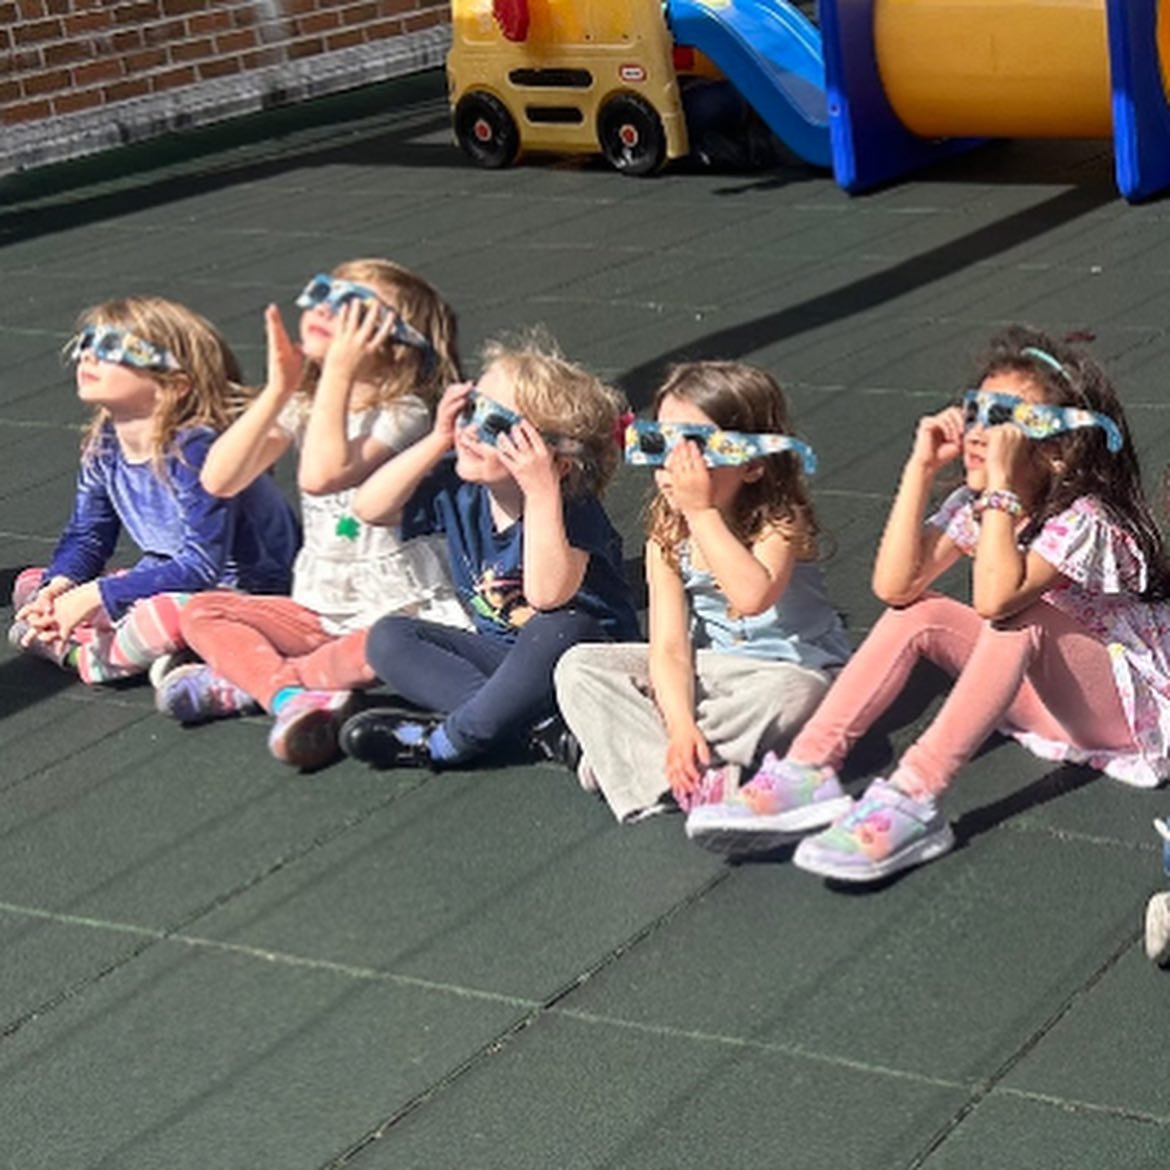 It was awesome to witness the eclipse with our MMS community on our terrace yesterday! We were so lucky to have one of our parents bring their telescope - complete with a sun filter for safety - and assist our students and other parents (along with s